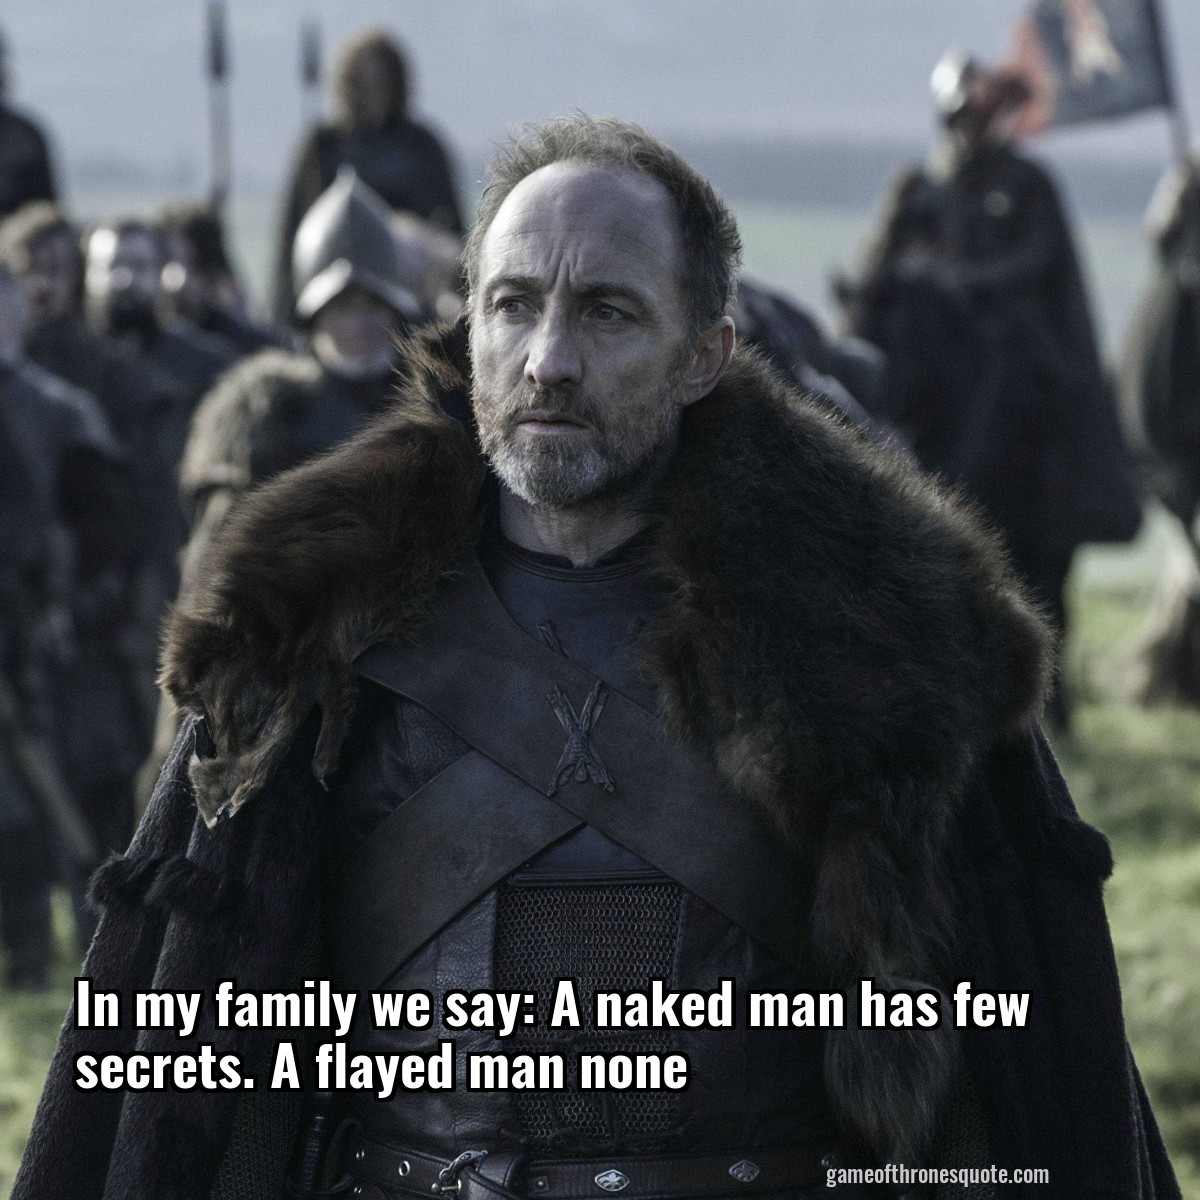 In my family we say: A naked man has few secrets. A flayed man none